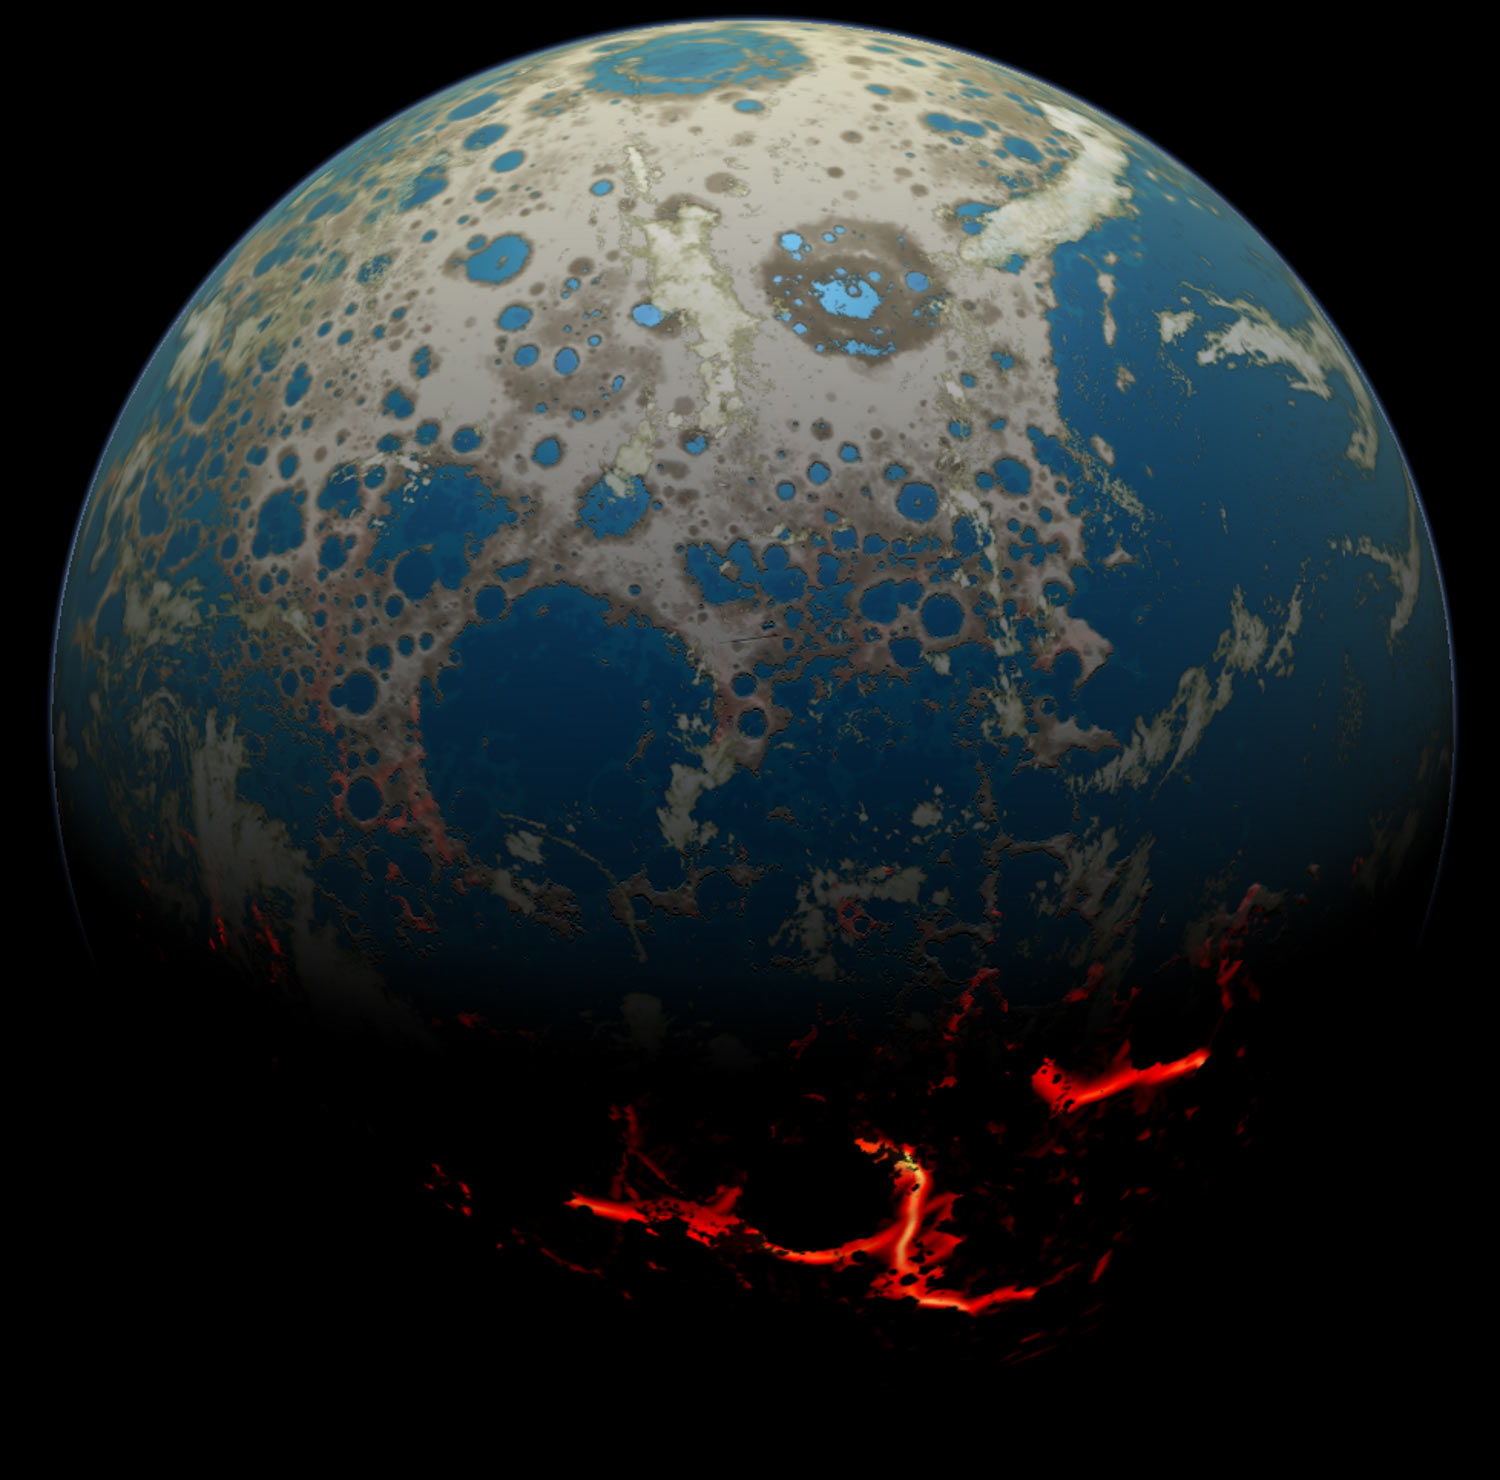 An artist’s impression of what the Earth may have looked like over three billion years ago, when our planet was a very different place, but still played host to a primitive form of life. Image credit: Simone Marchi/NASA. Image credit: None